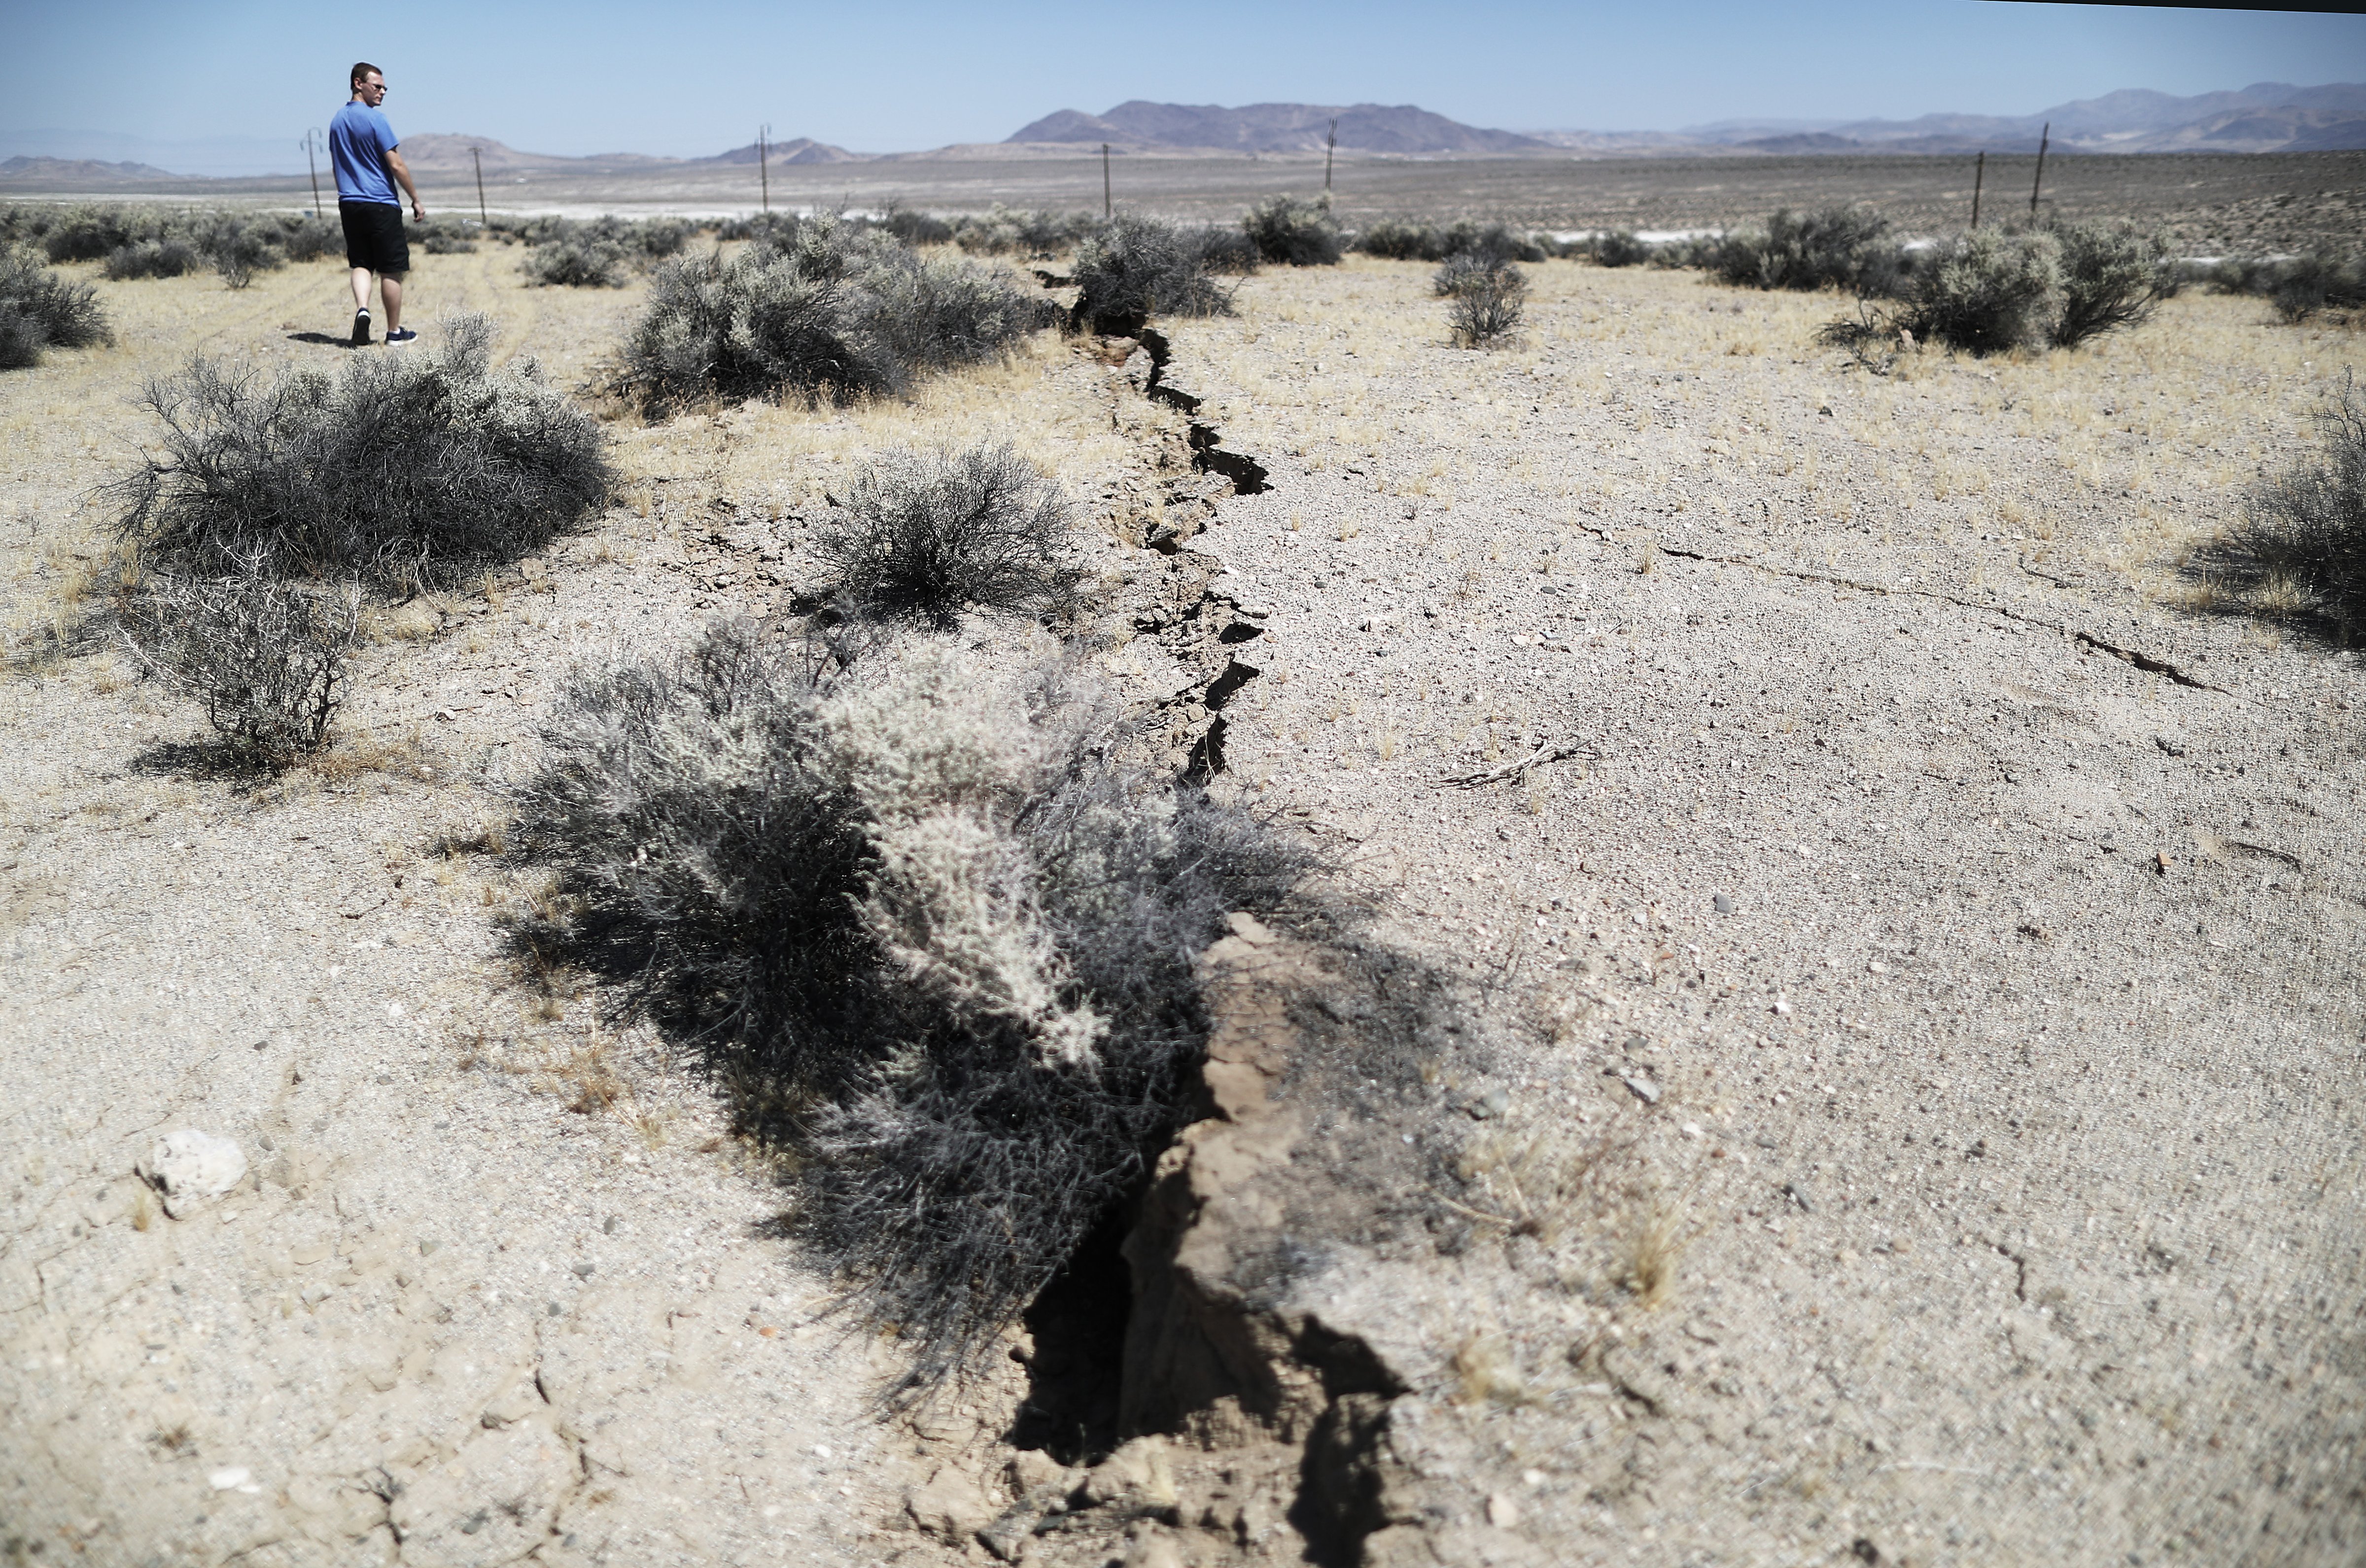 An onlooker views newly ruptured ground after a 7.1 magnitude earthquake struck in the area on July 6, 2019 near Ridgecrest, California. (Mario Tama—Getty Images)